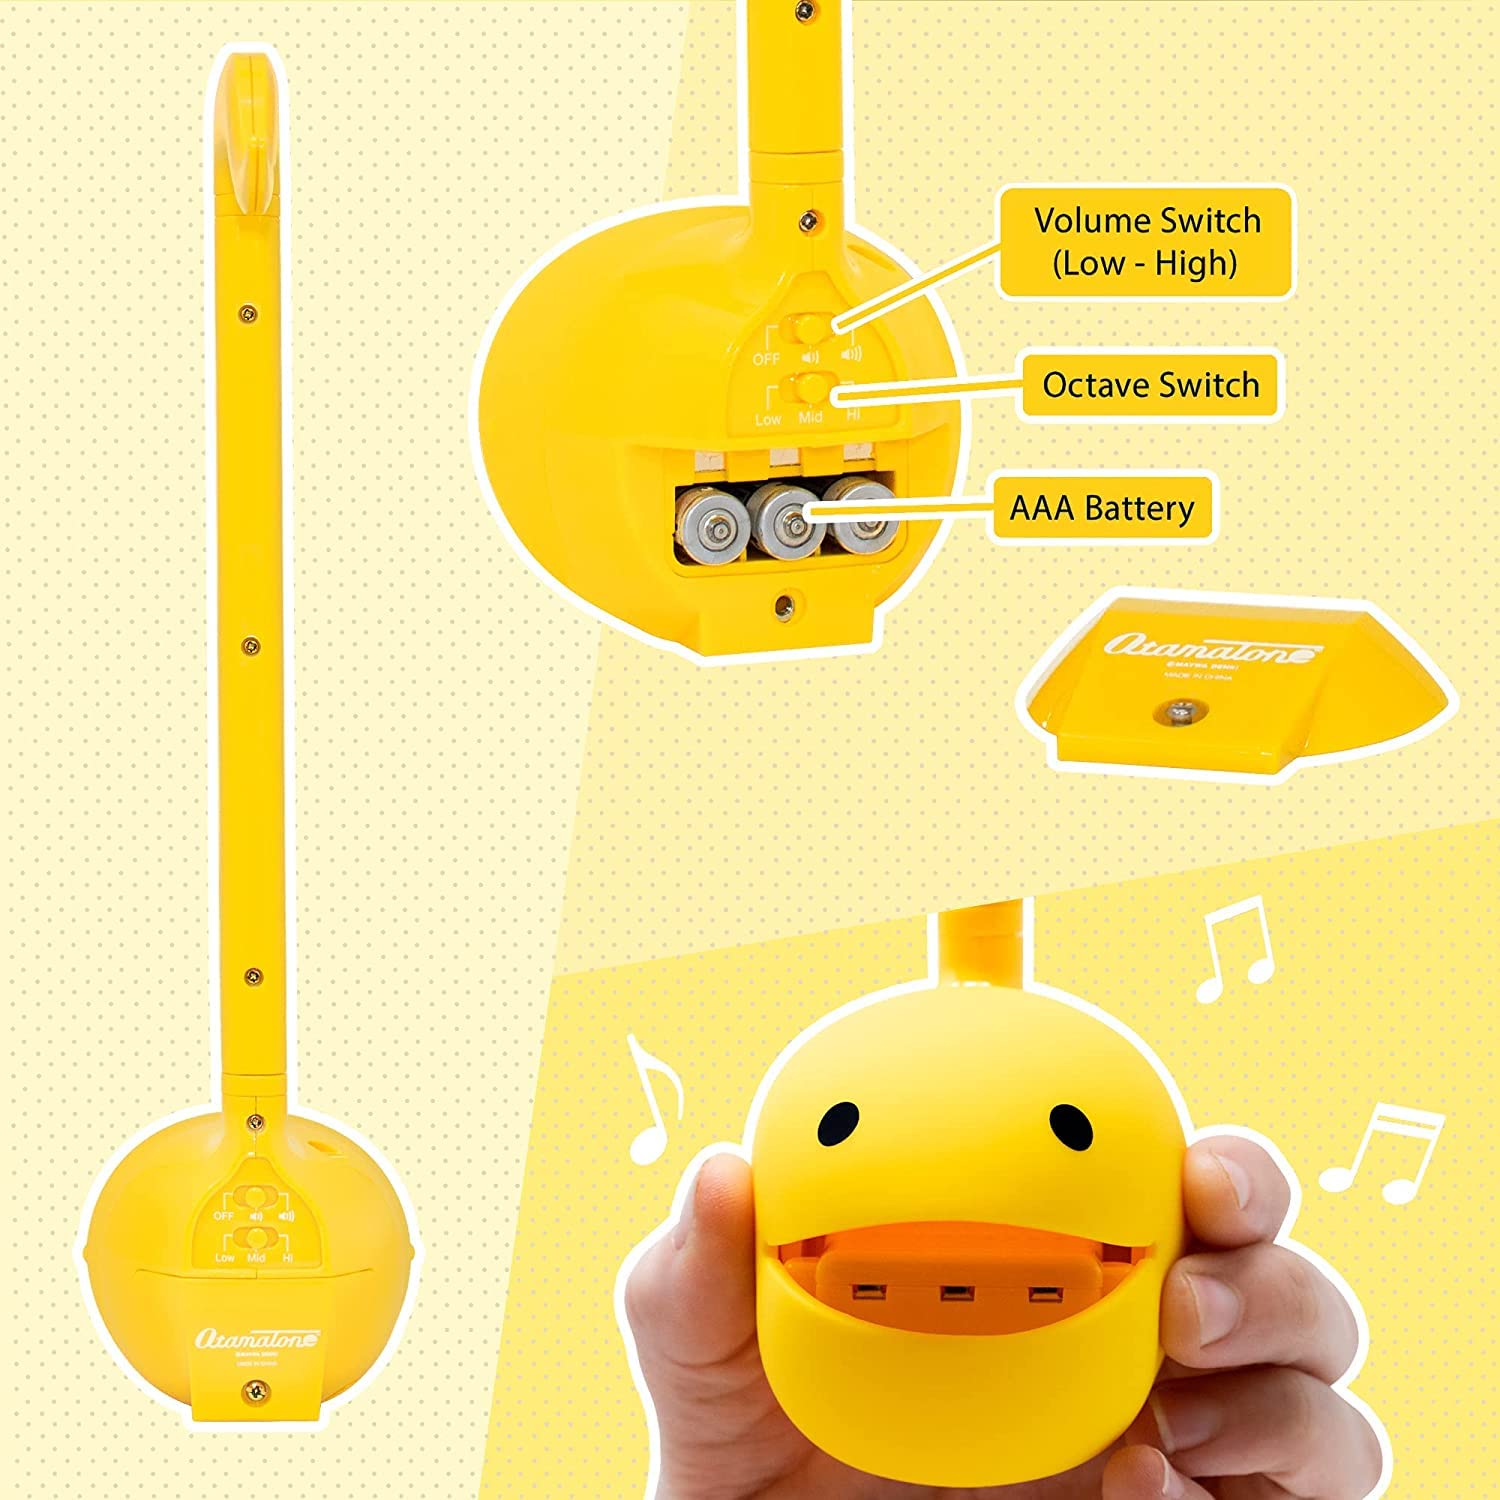 Otamatone [Color Series] Japanese Electronic Musical Instrument Portable Synthesizer from Japan by Cube/Maywa Denki [English version] [Regular size]-Yellow, Hot Pink set